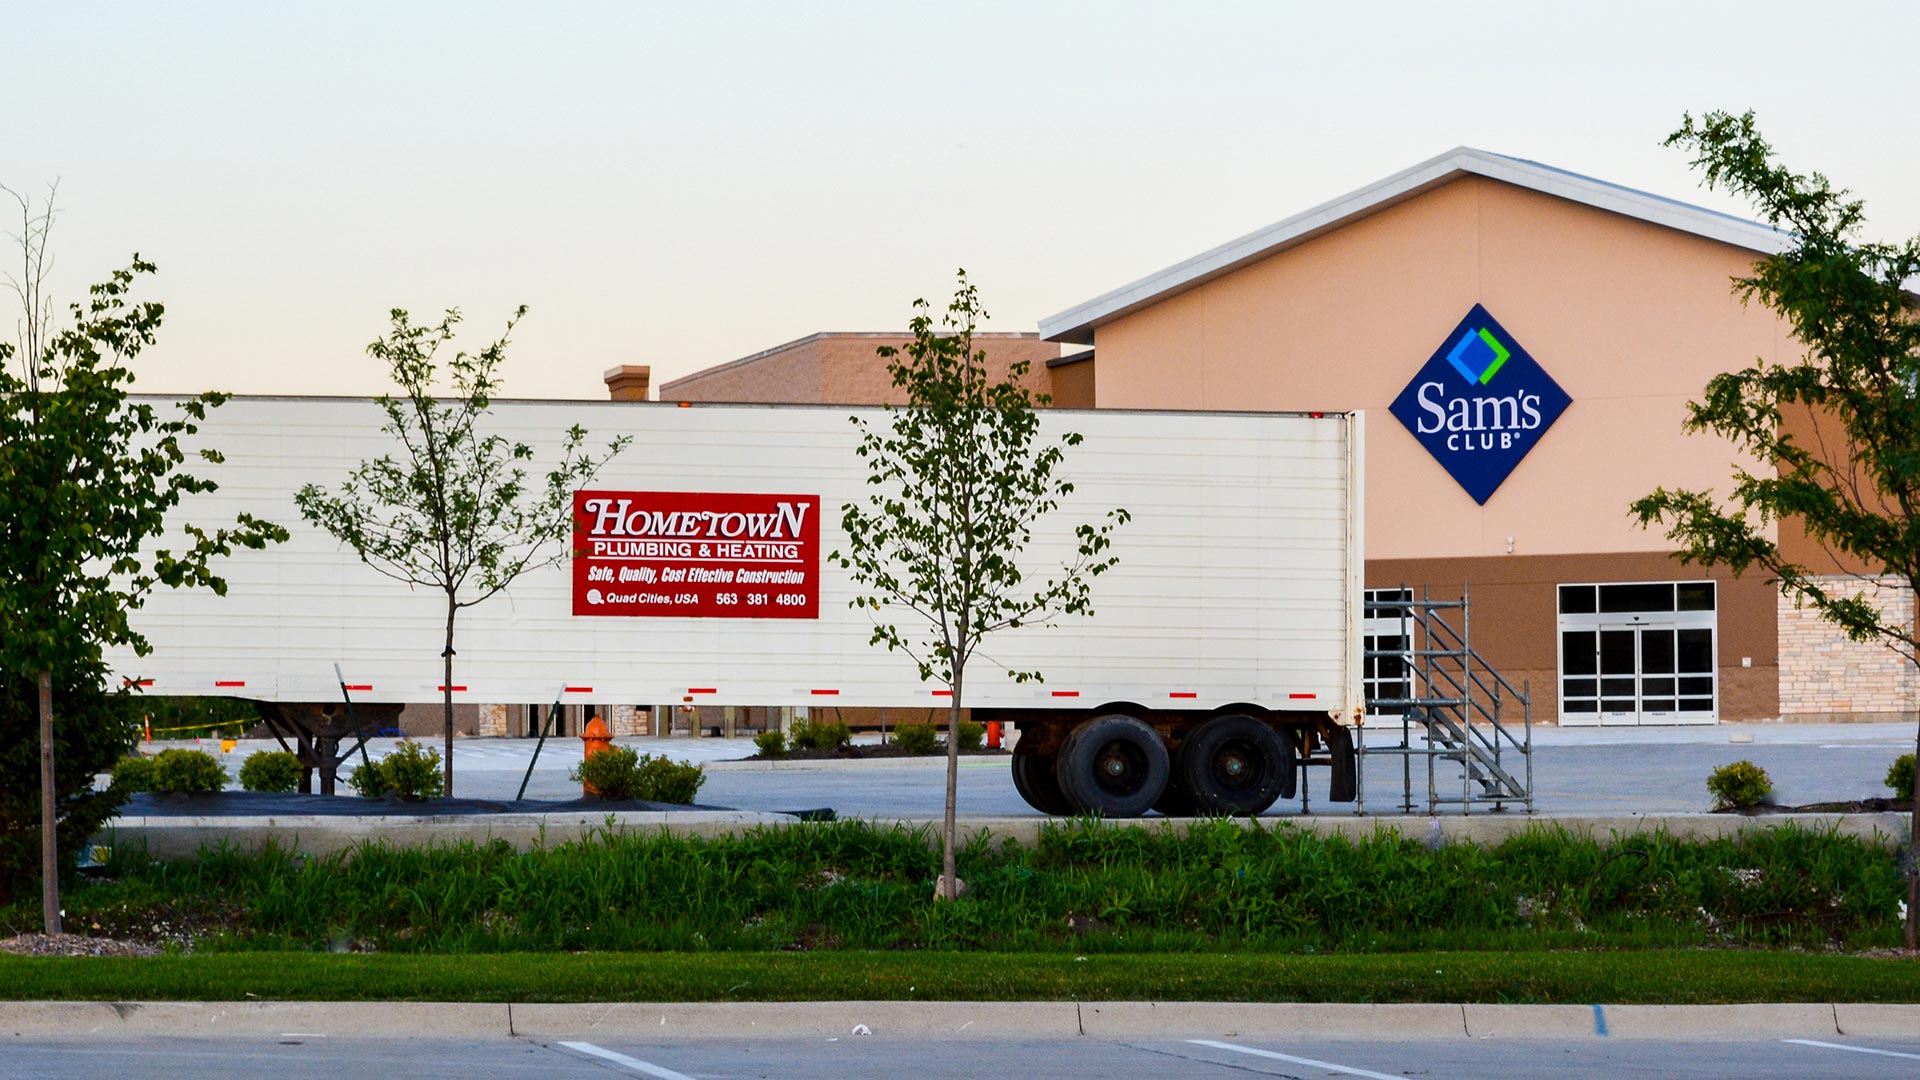 Hometown Plumbing and Heating Quad Cities Iowa Projects Sam's Club external